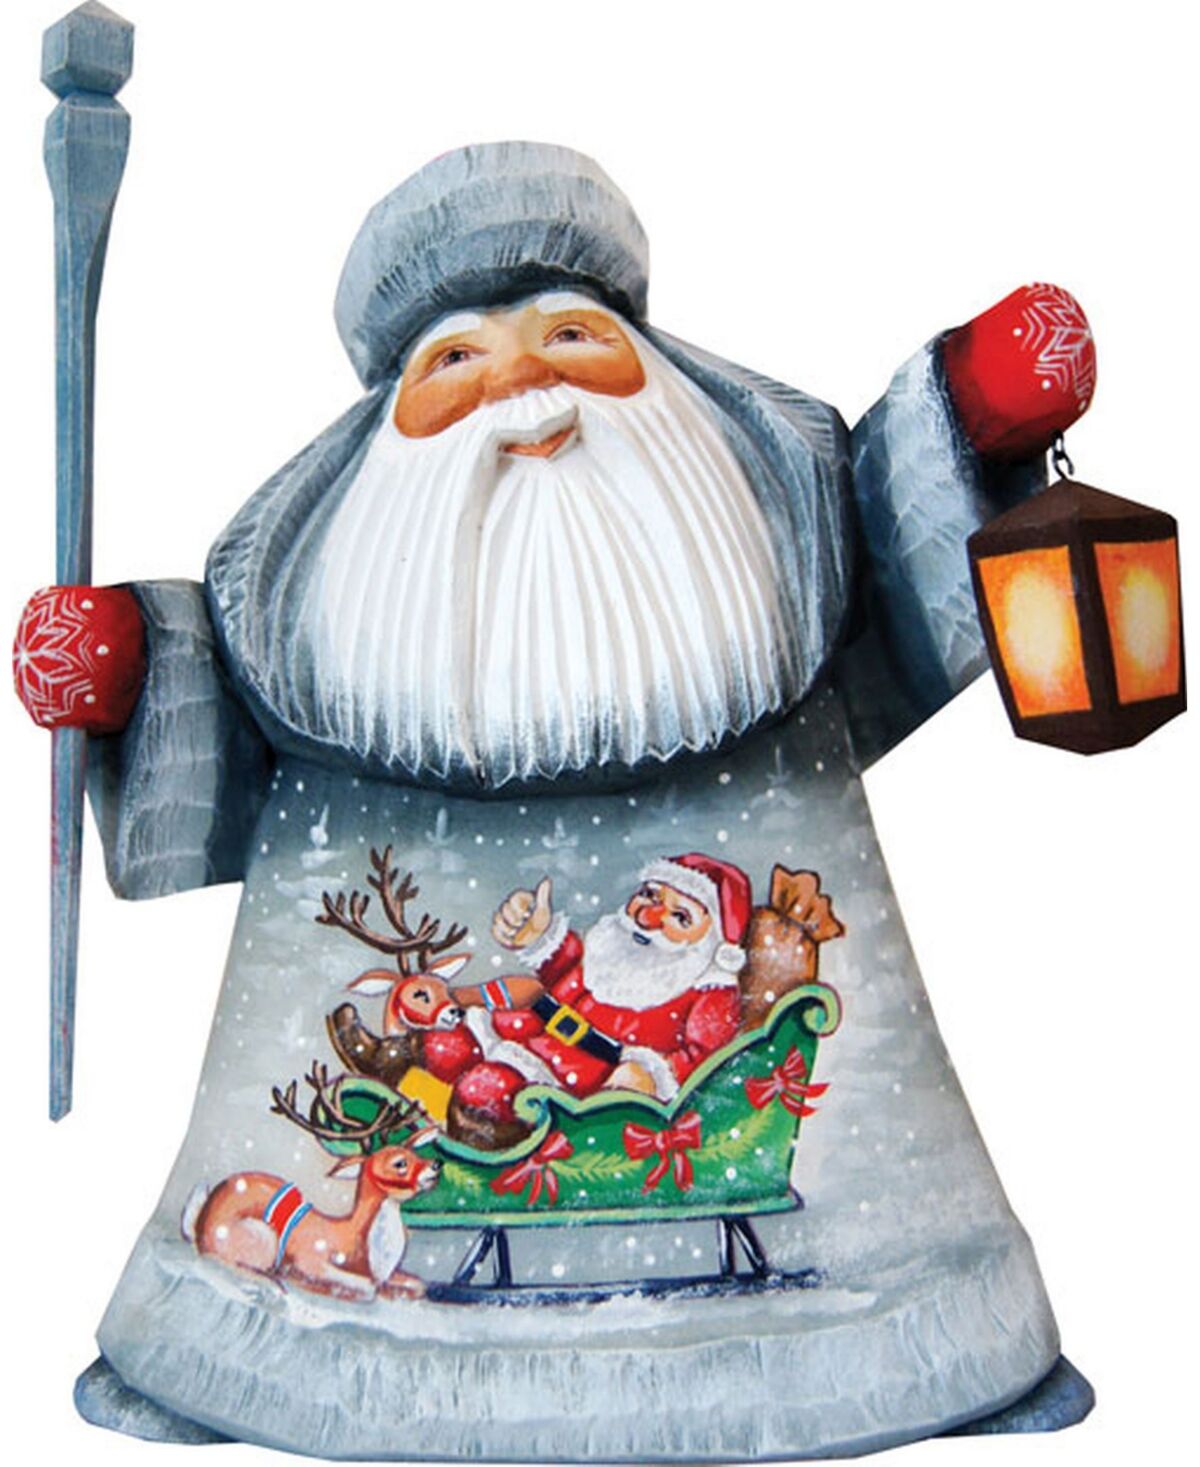 G.DeBrekht Woodcarved and Hand Painted Santa with Kids Figurine - Multi